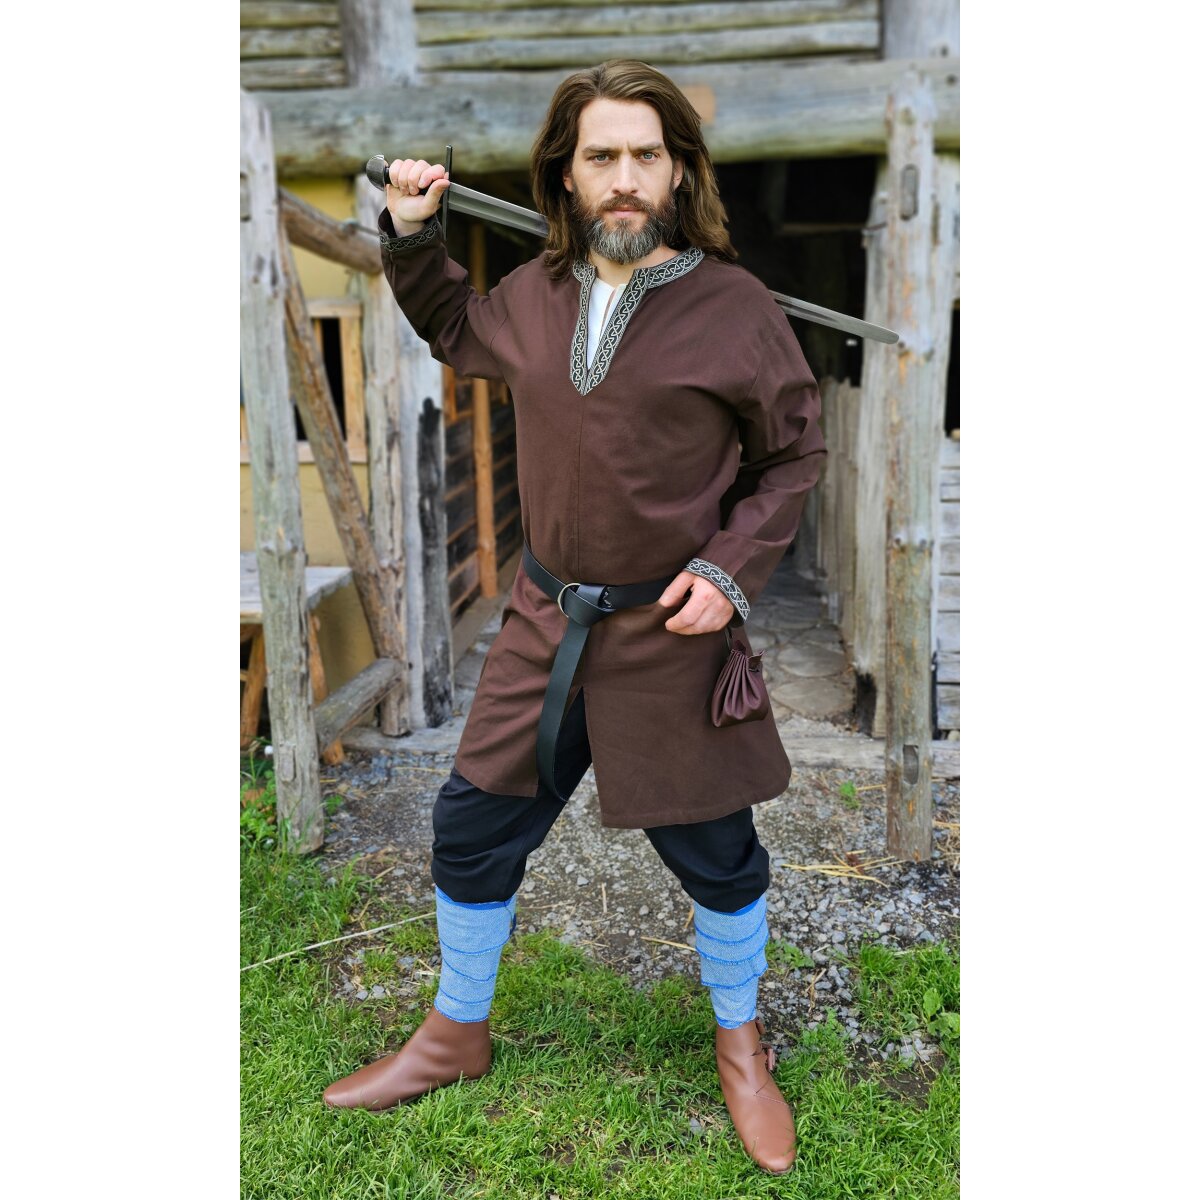 Classic brown Viking tunic with knot pattern...